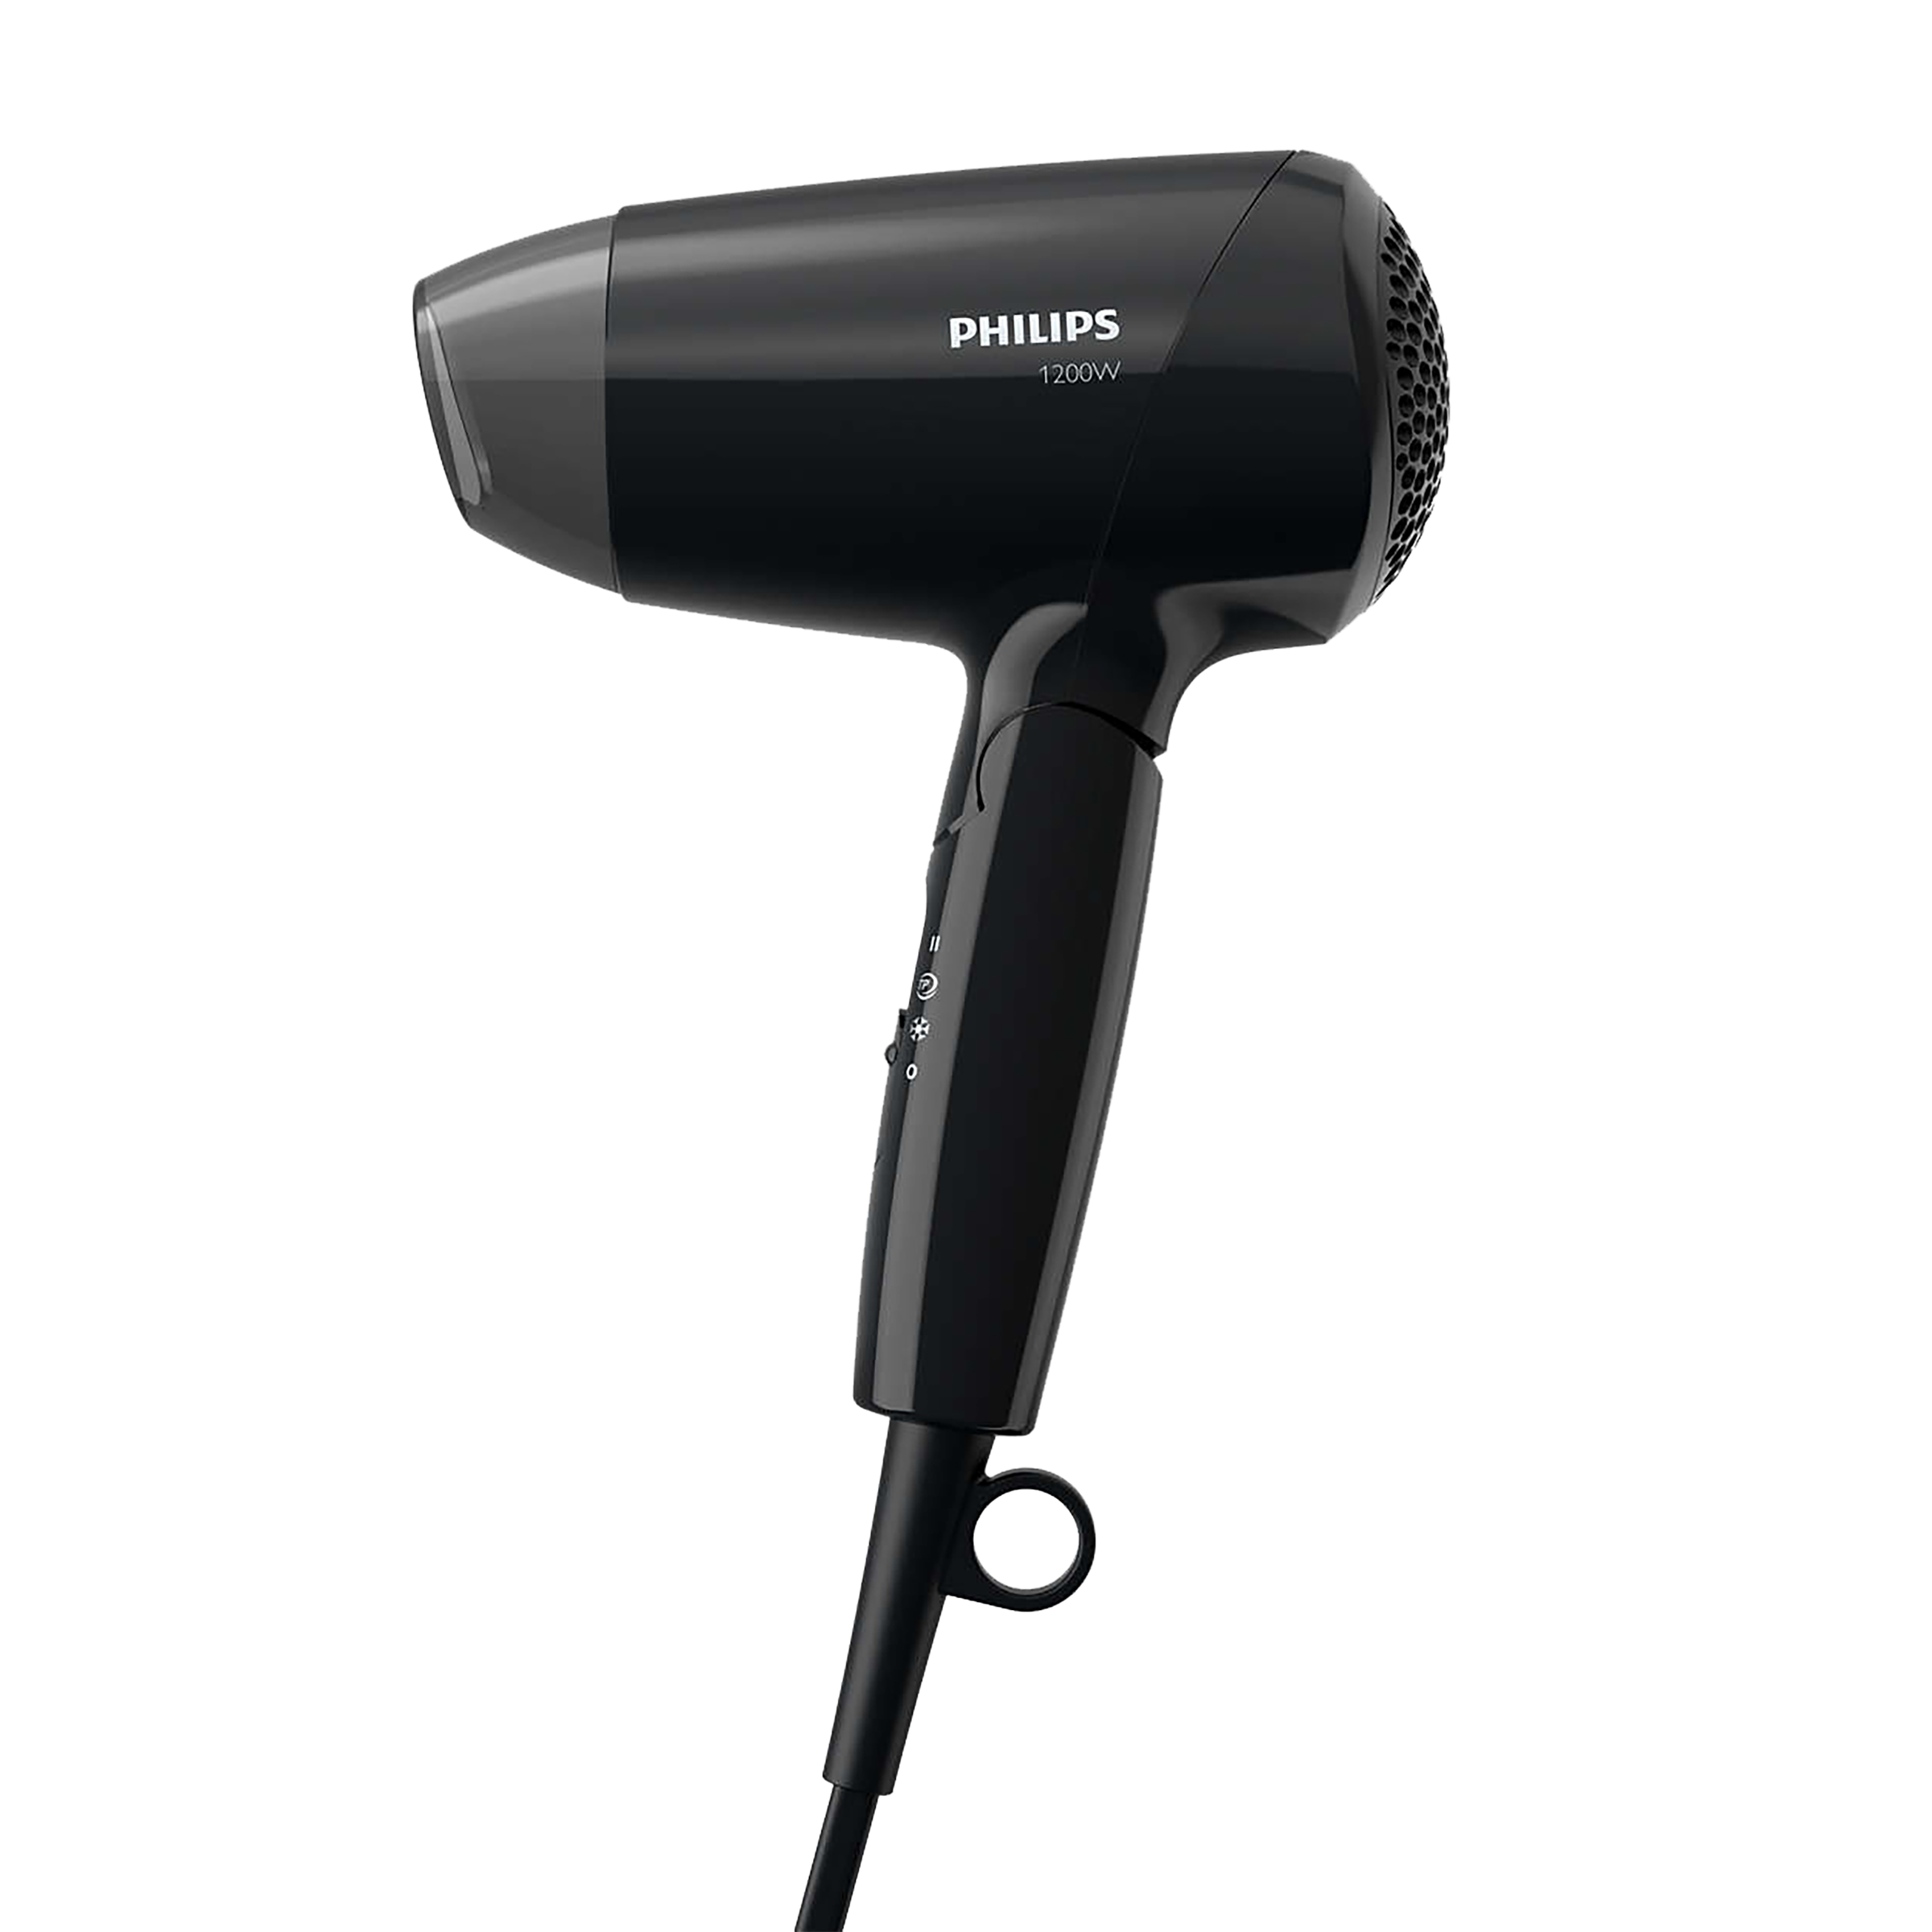 Hair dryer - Free technology icons